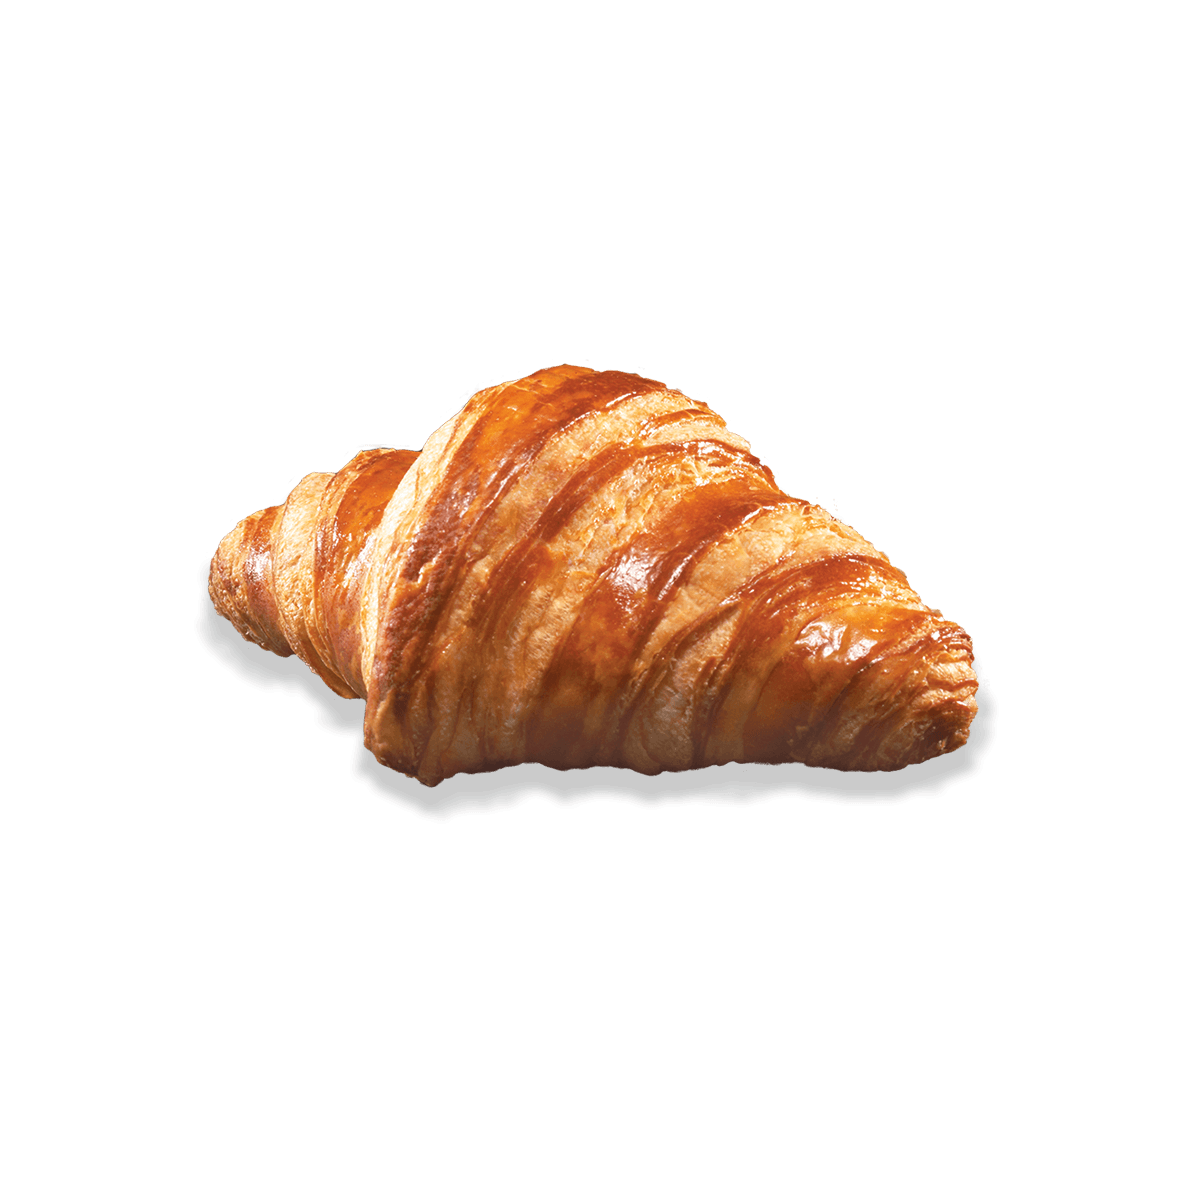 perfect mini croissant on the side